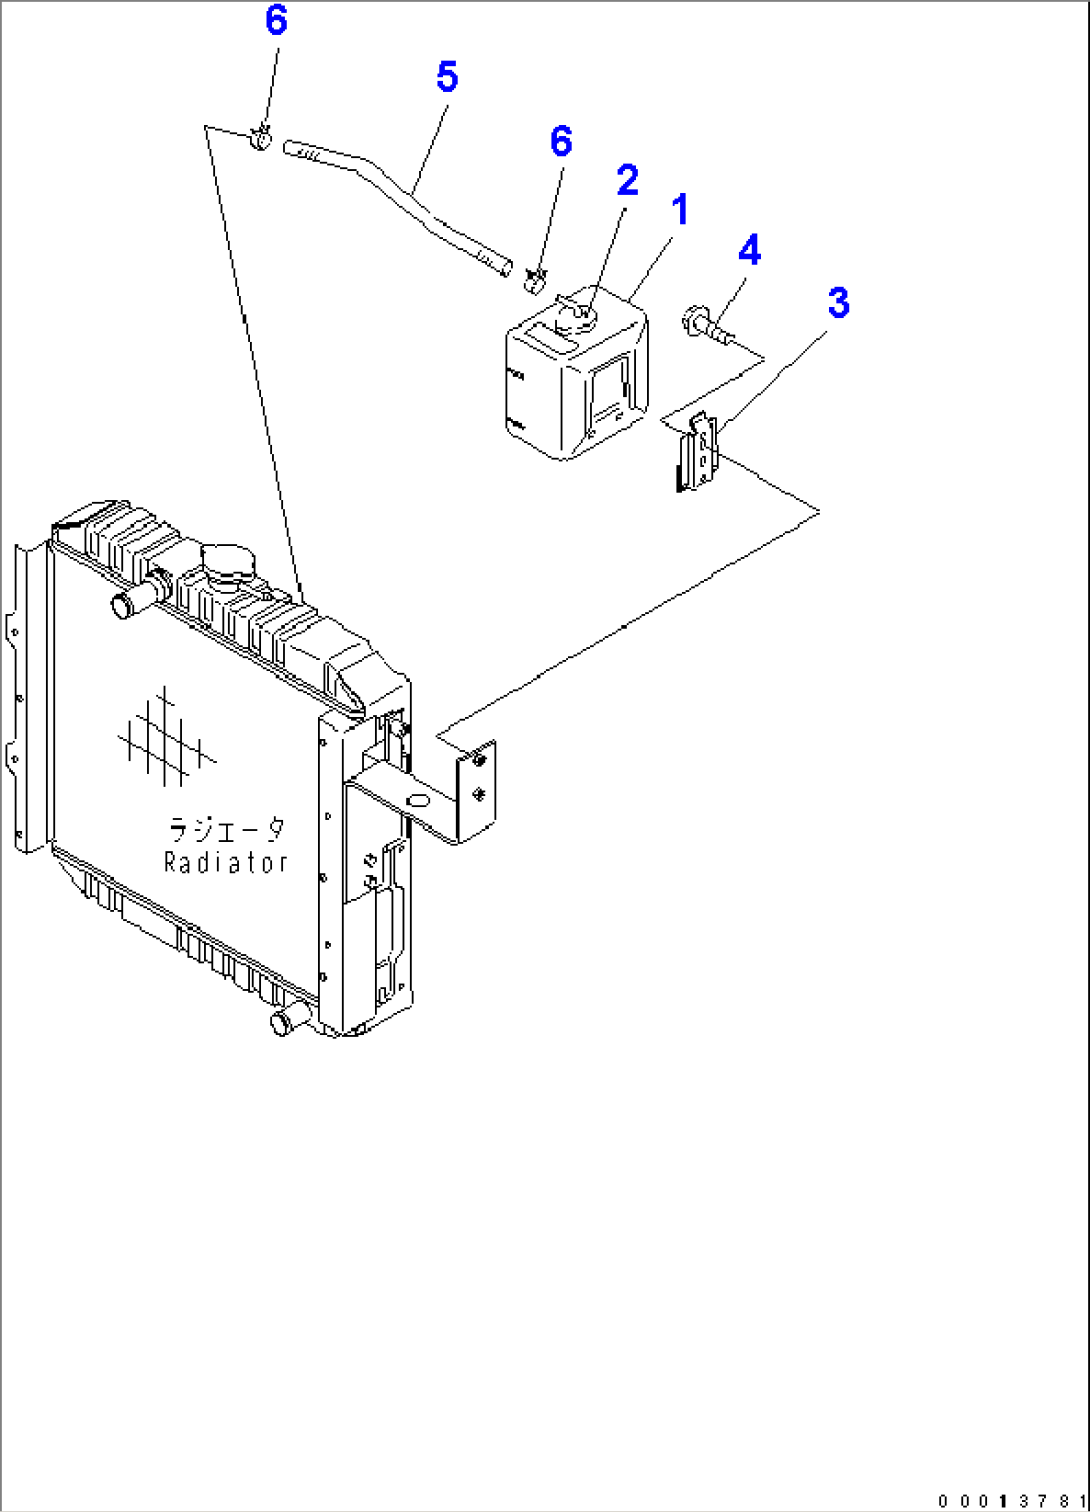 RESERVE TANK AND MOUNT PARTS